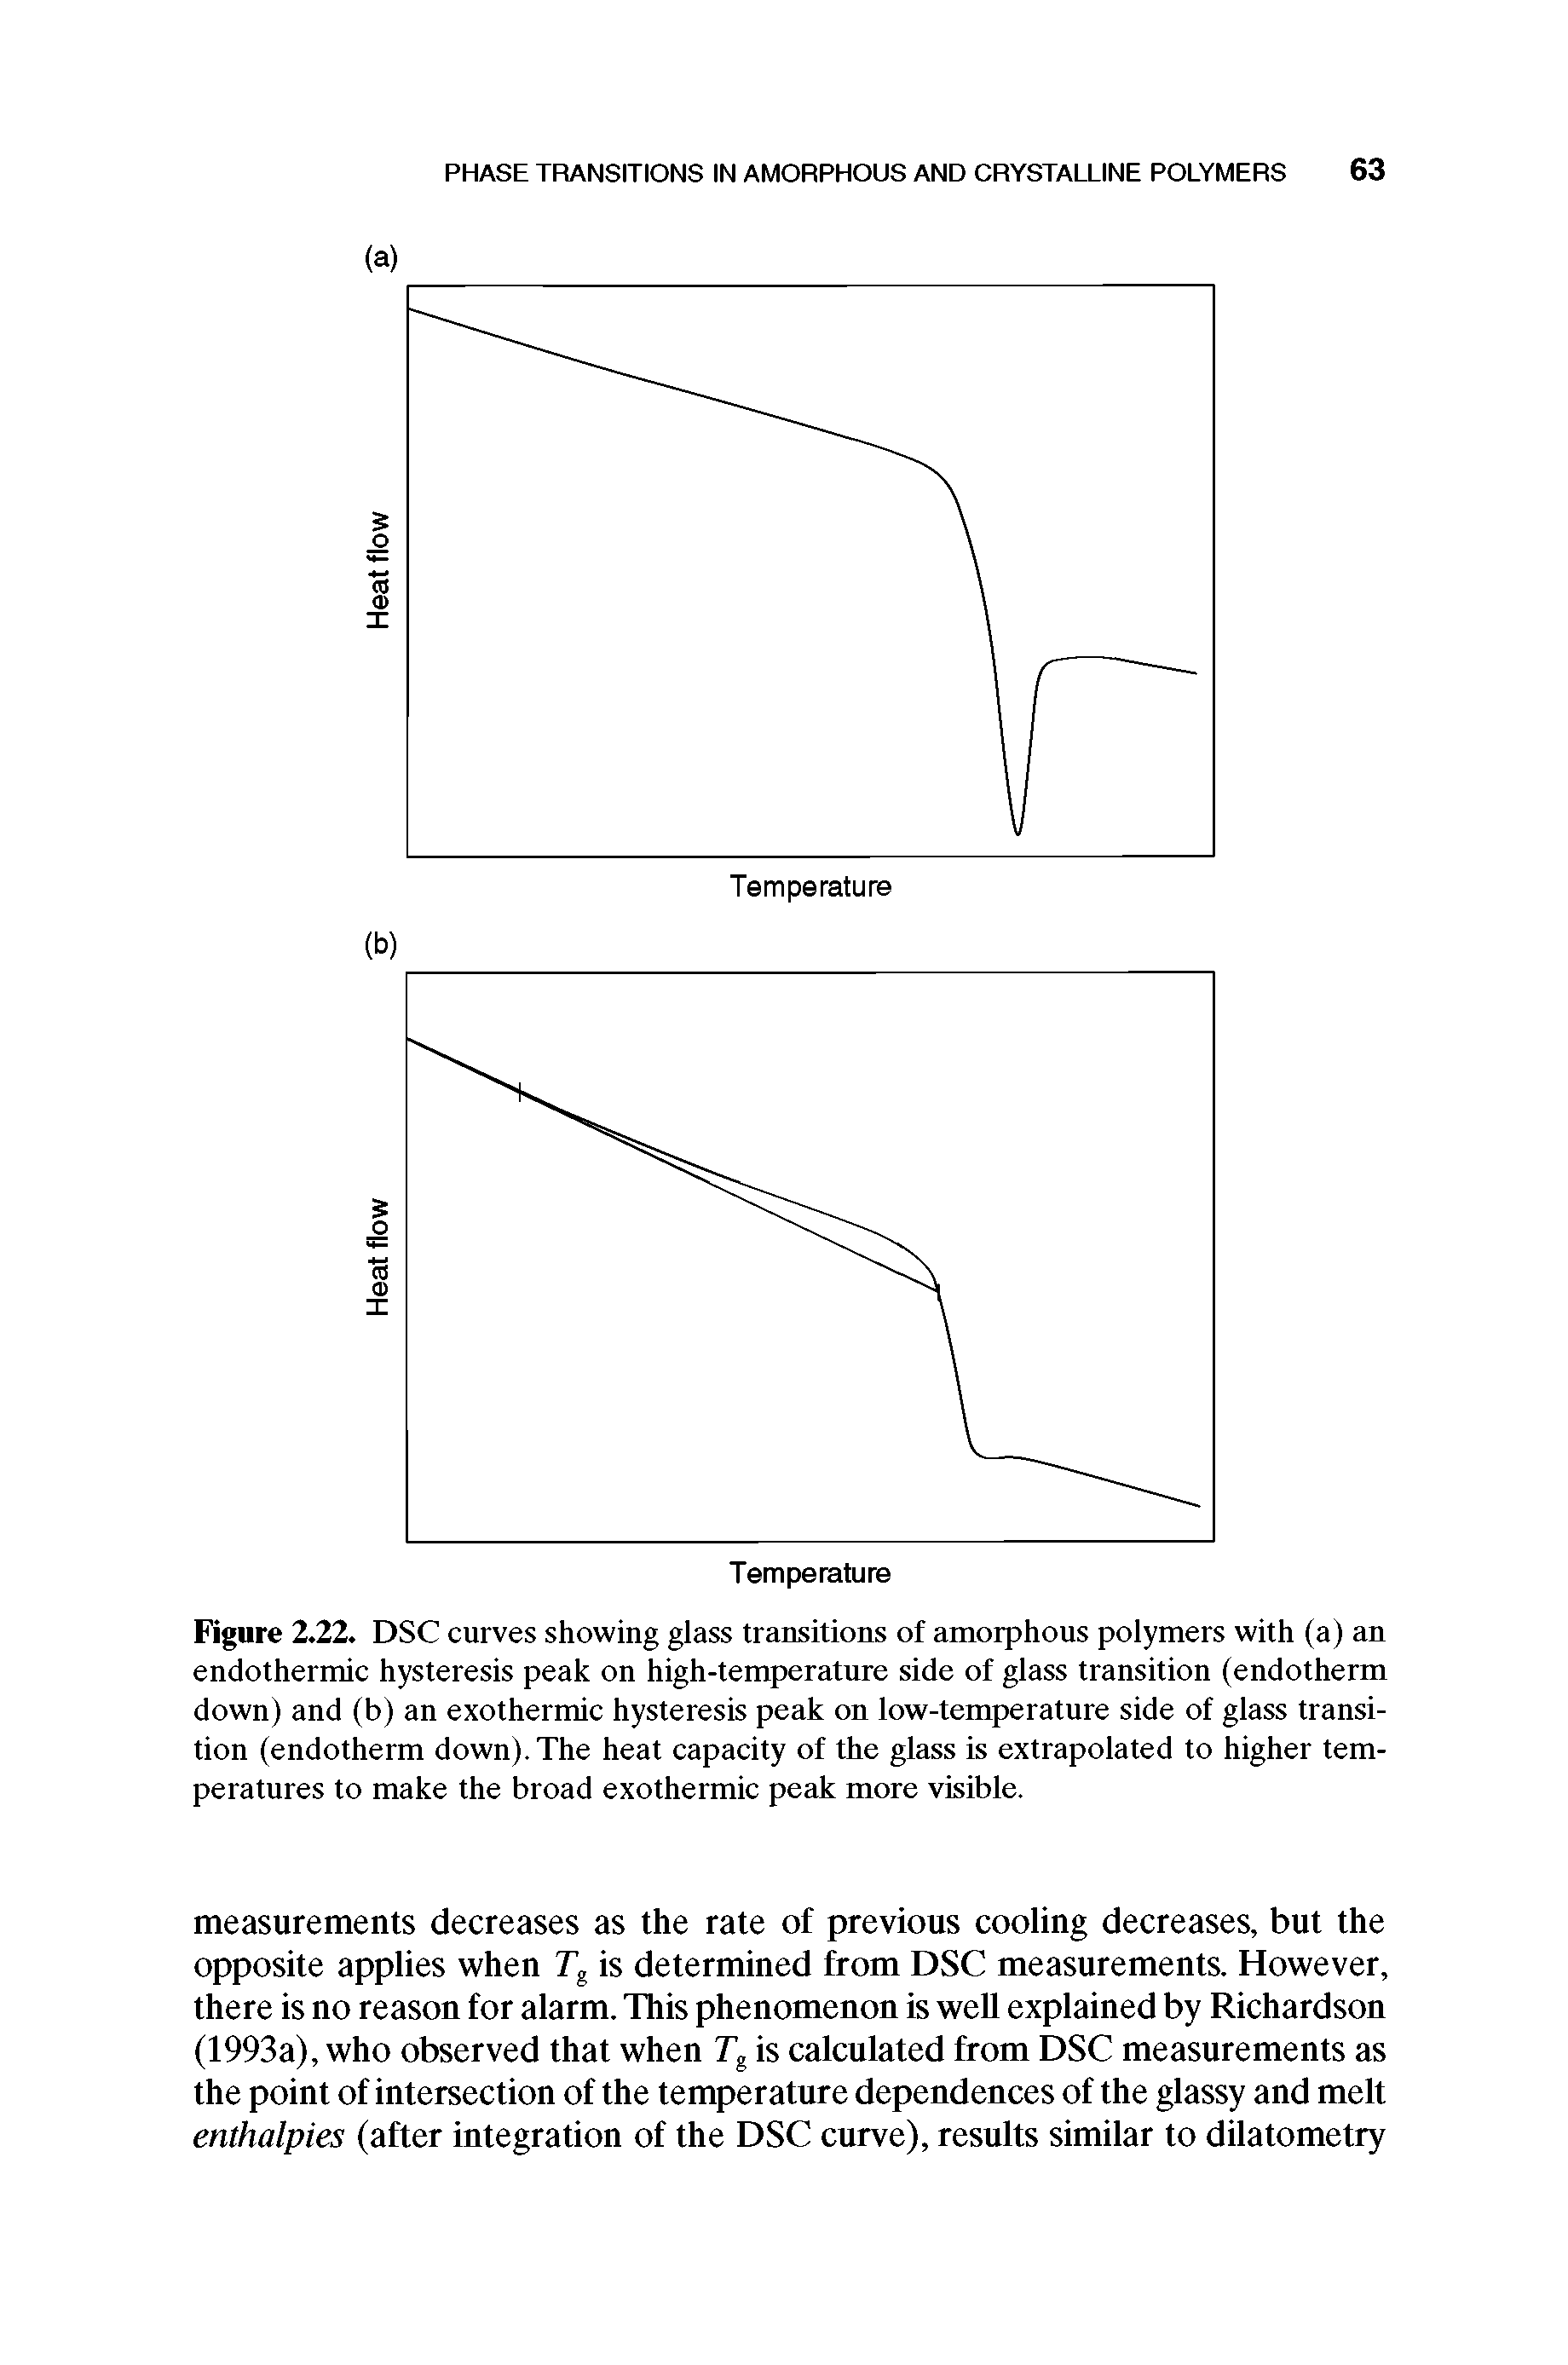 Figure 2.22. DSC curves showing glass transitions of amorphous polymers with (a) an endothermic hysteresis peak on high-temperature side of glass transition (endotherm down) and (b) an exothermic hysteresis peak on low-temperature side of glass transition (endotherm down). The heat capacity of the glass is extrapolated to higher temperatures to make the broad exothermic peak more visible.